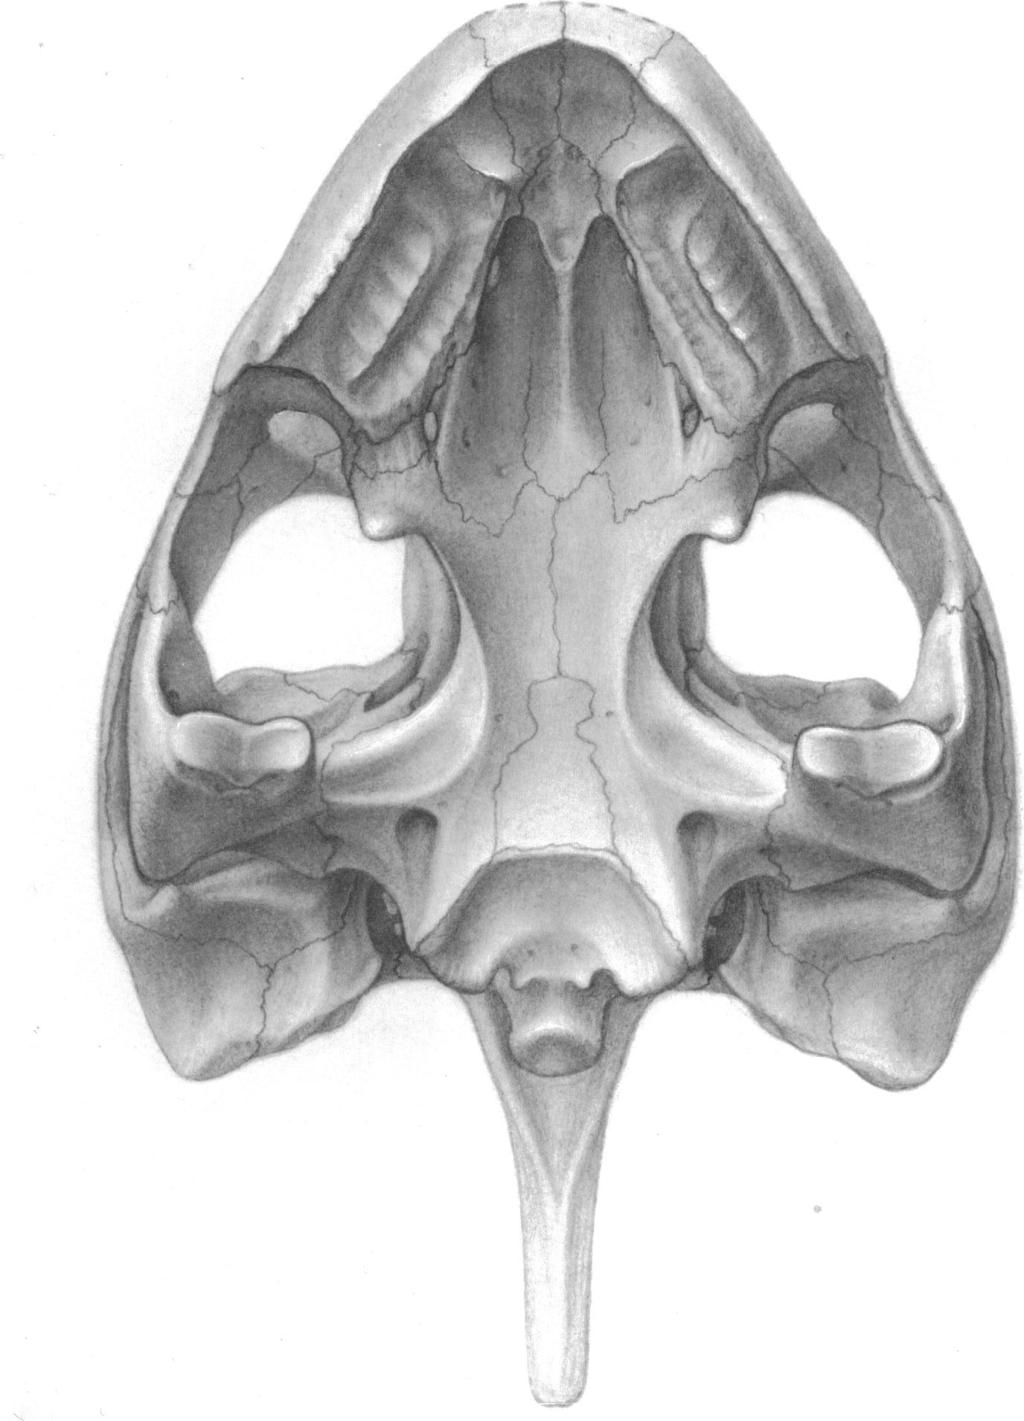 12 AMERICAN MUSEUM NOVITATES NO. 2941 Fig. 6. Partially restored skull of Baptemys in ventral view. Figure is based on YPM 3758, with reference to DMNH 51 1.